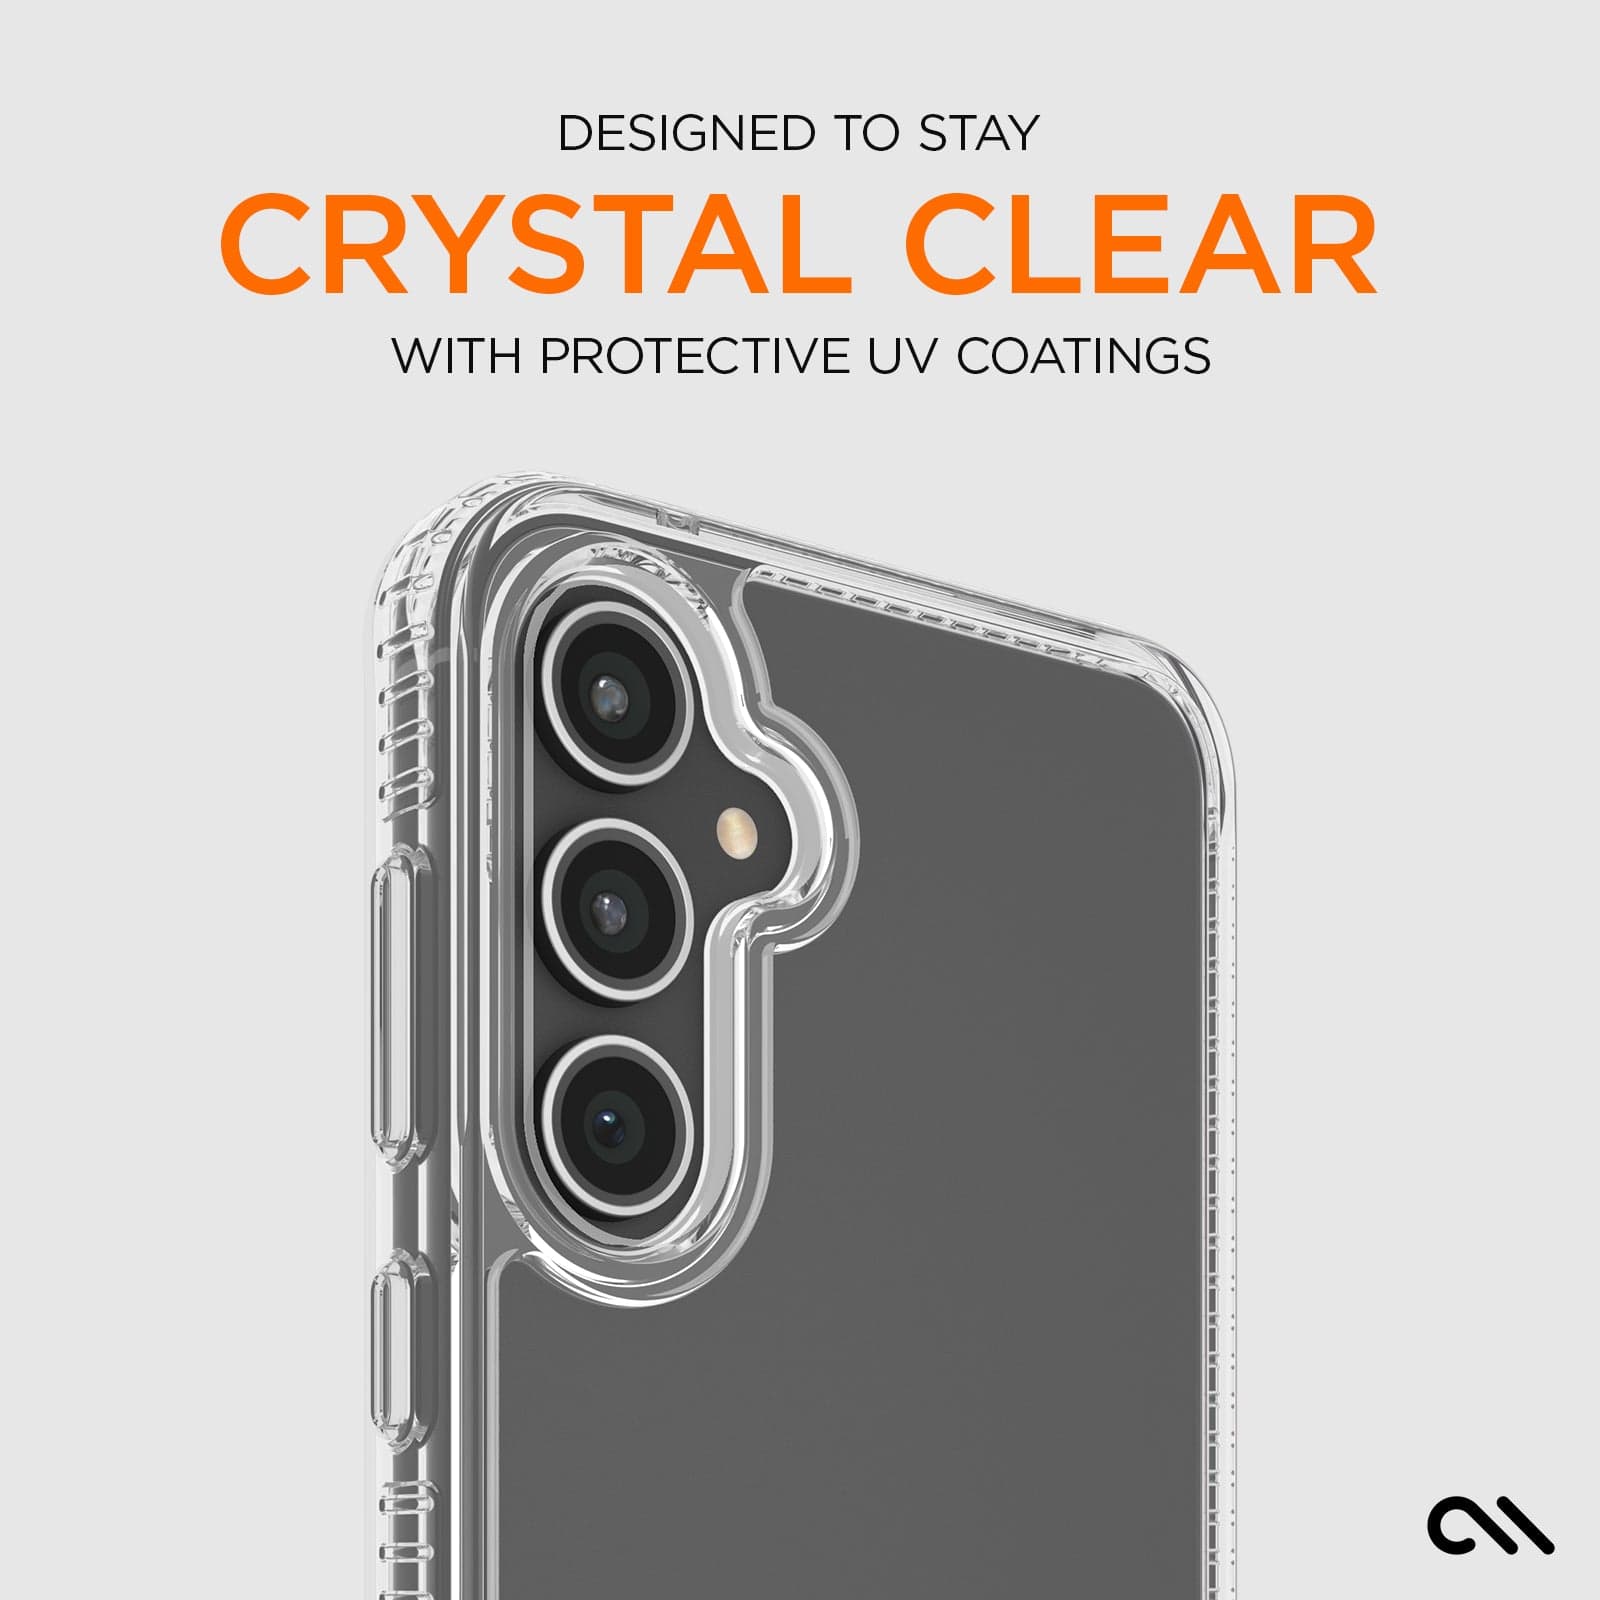 DESIGNED TO STAY CRYSTAL CLEAR WITH PROTECTIVE UV COATINGS